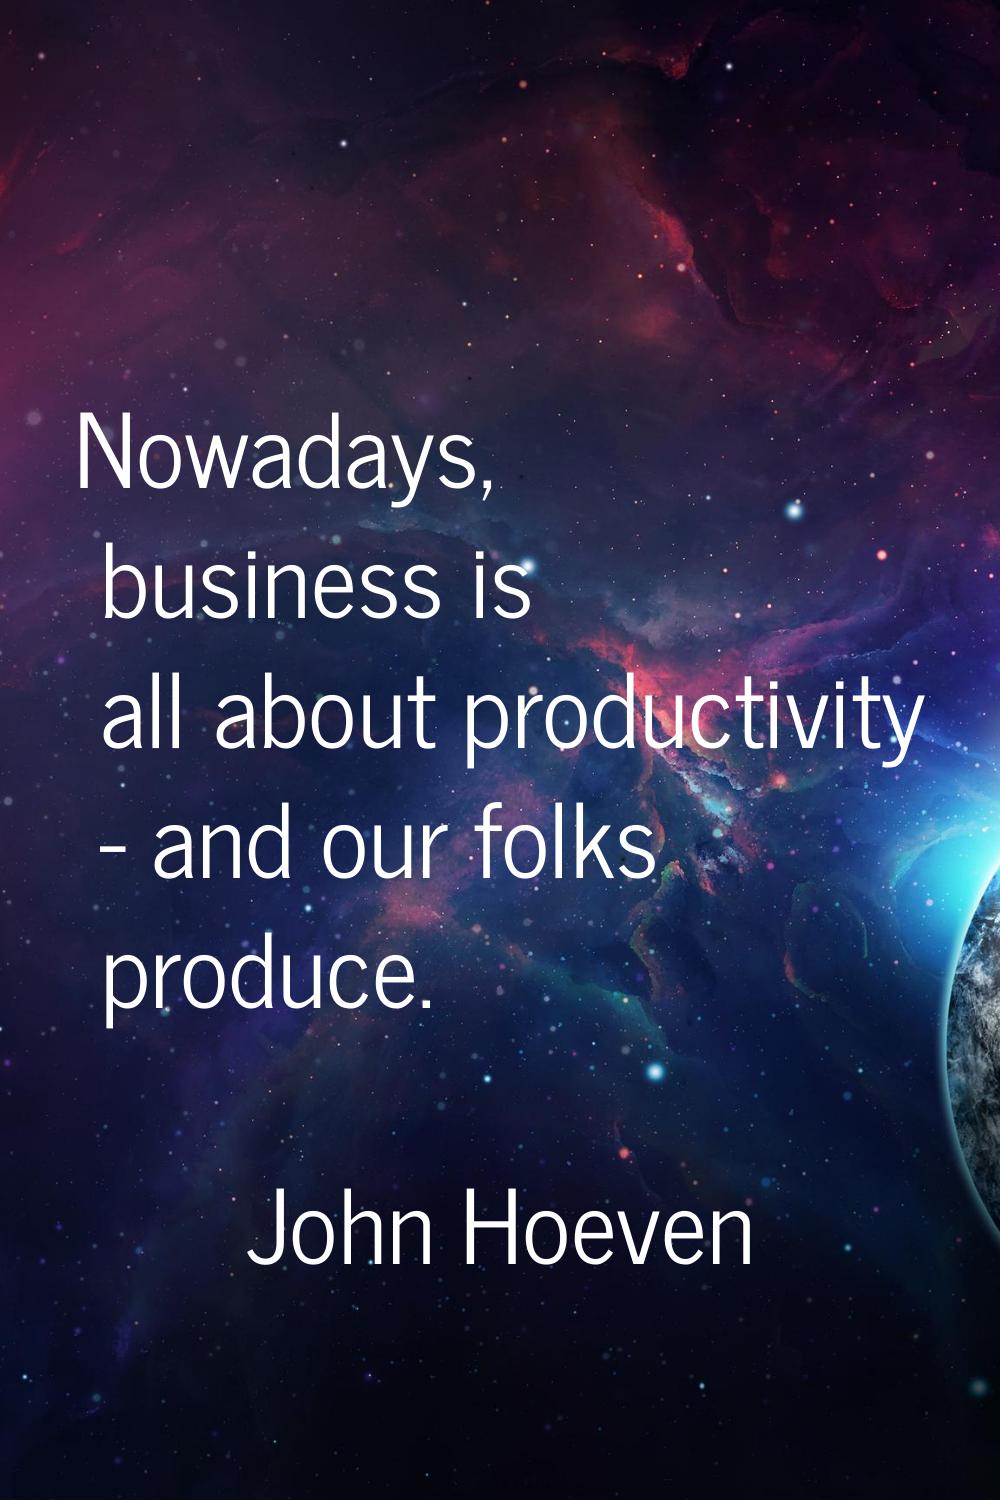 Nowadays, business is all about productivity - and our folks produce.